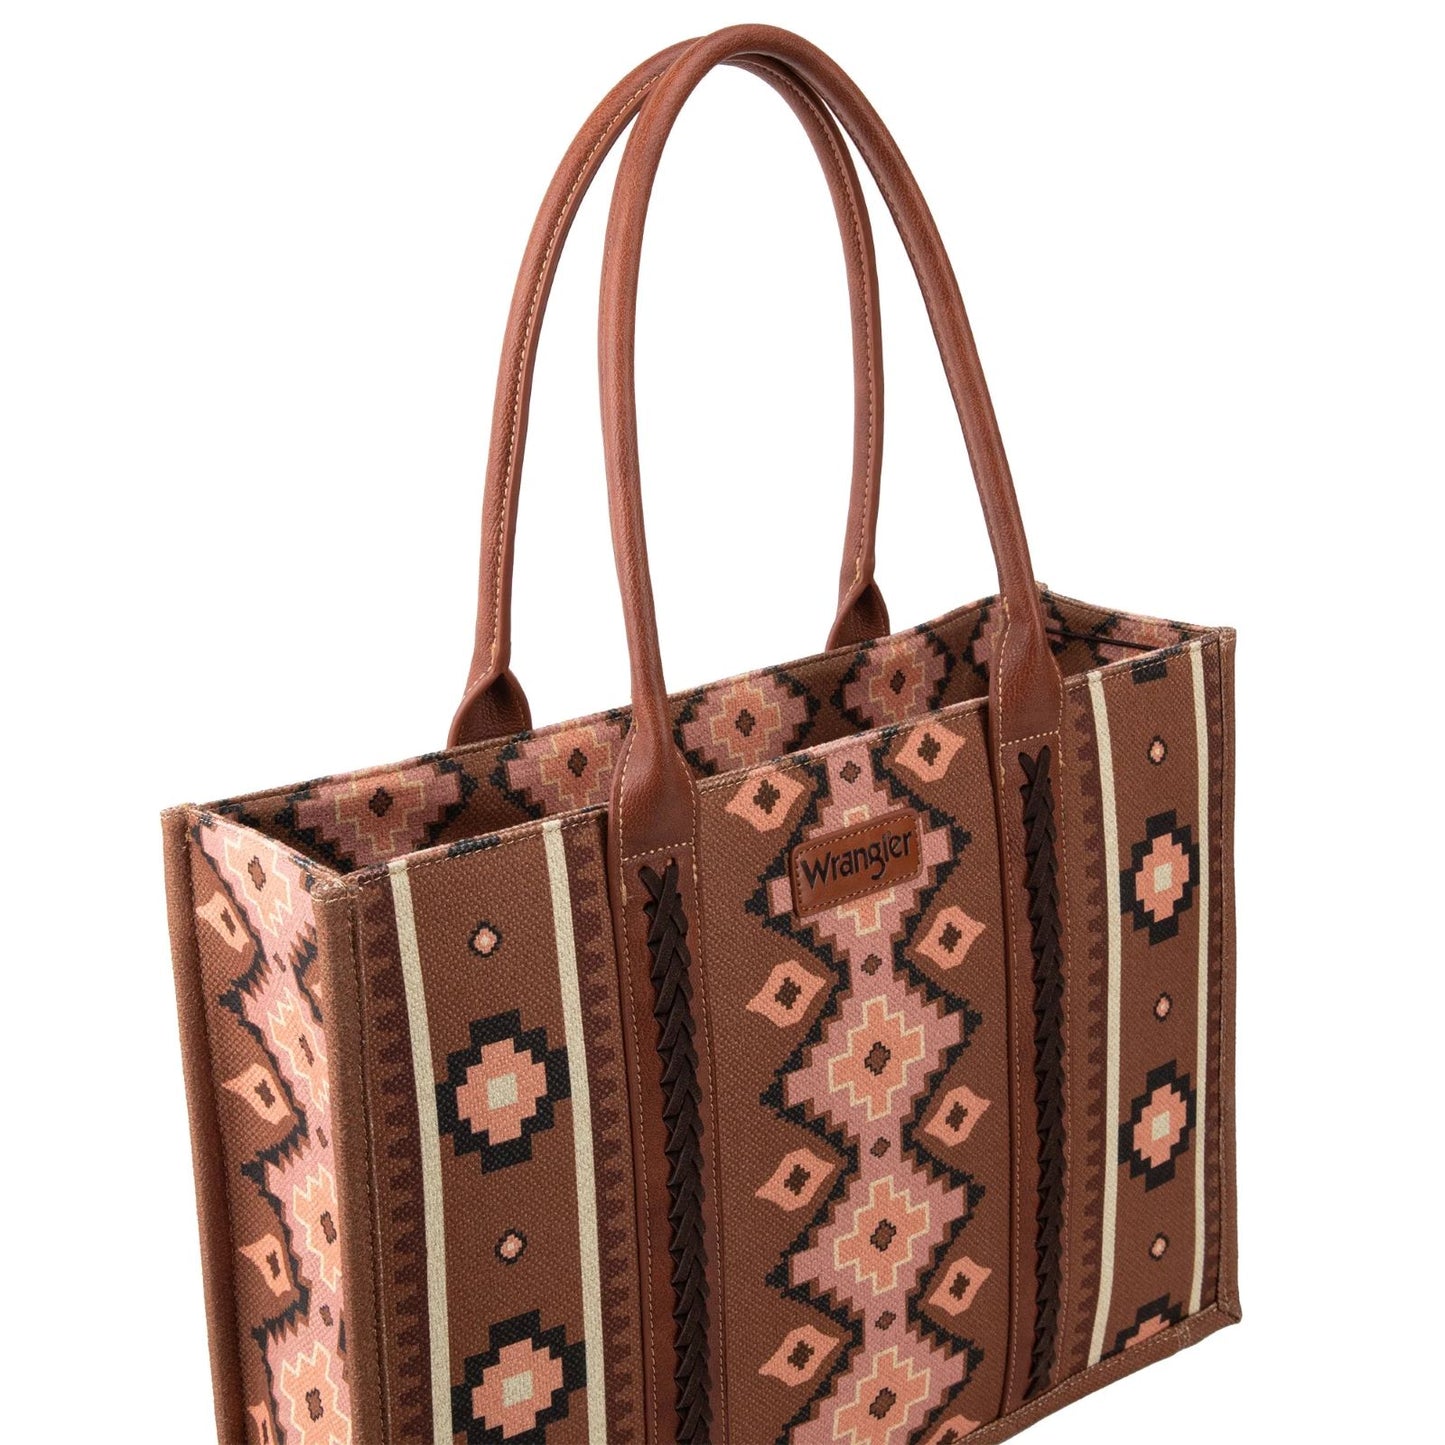 Wrangler Southwestern Pattern Dual Sided Print Canvas Large Brown